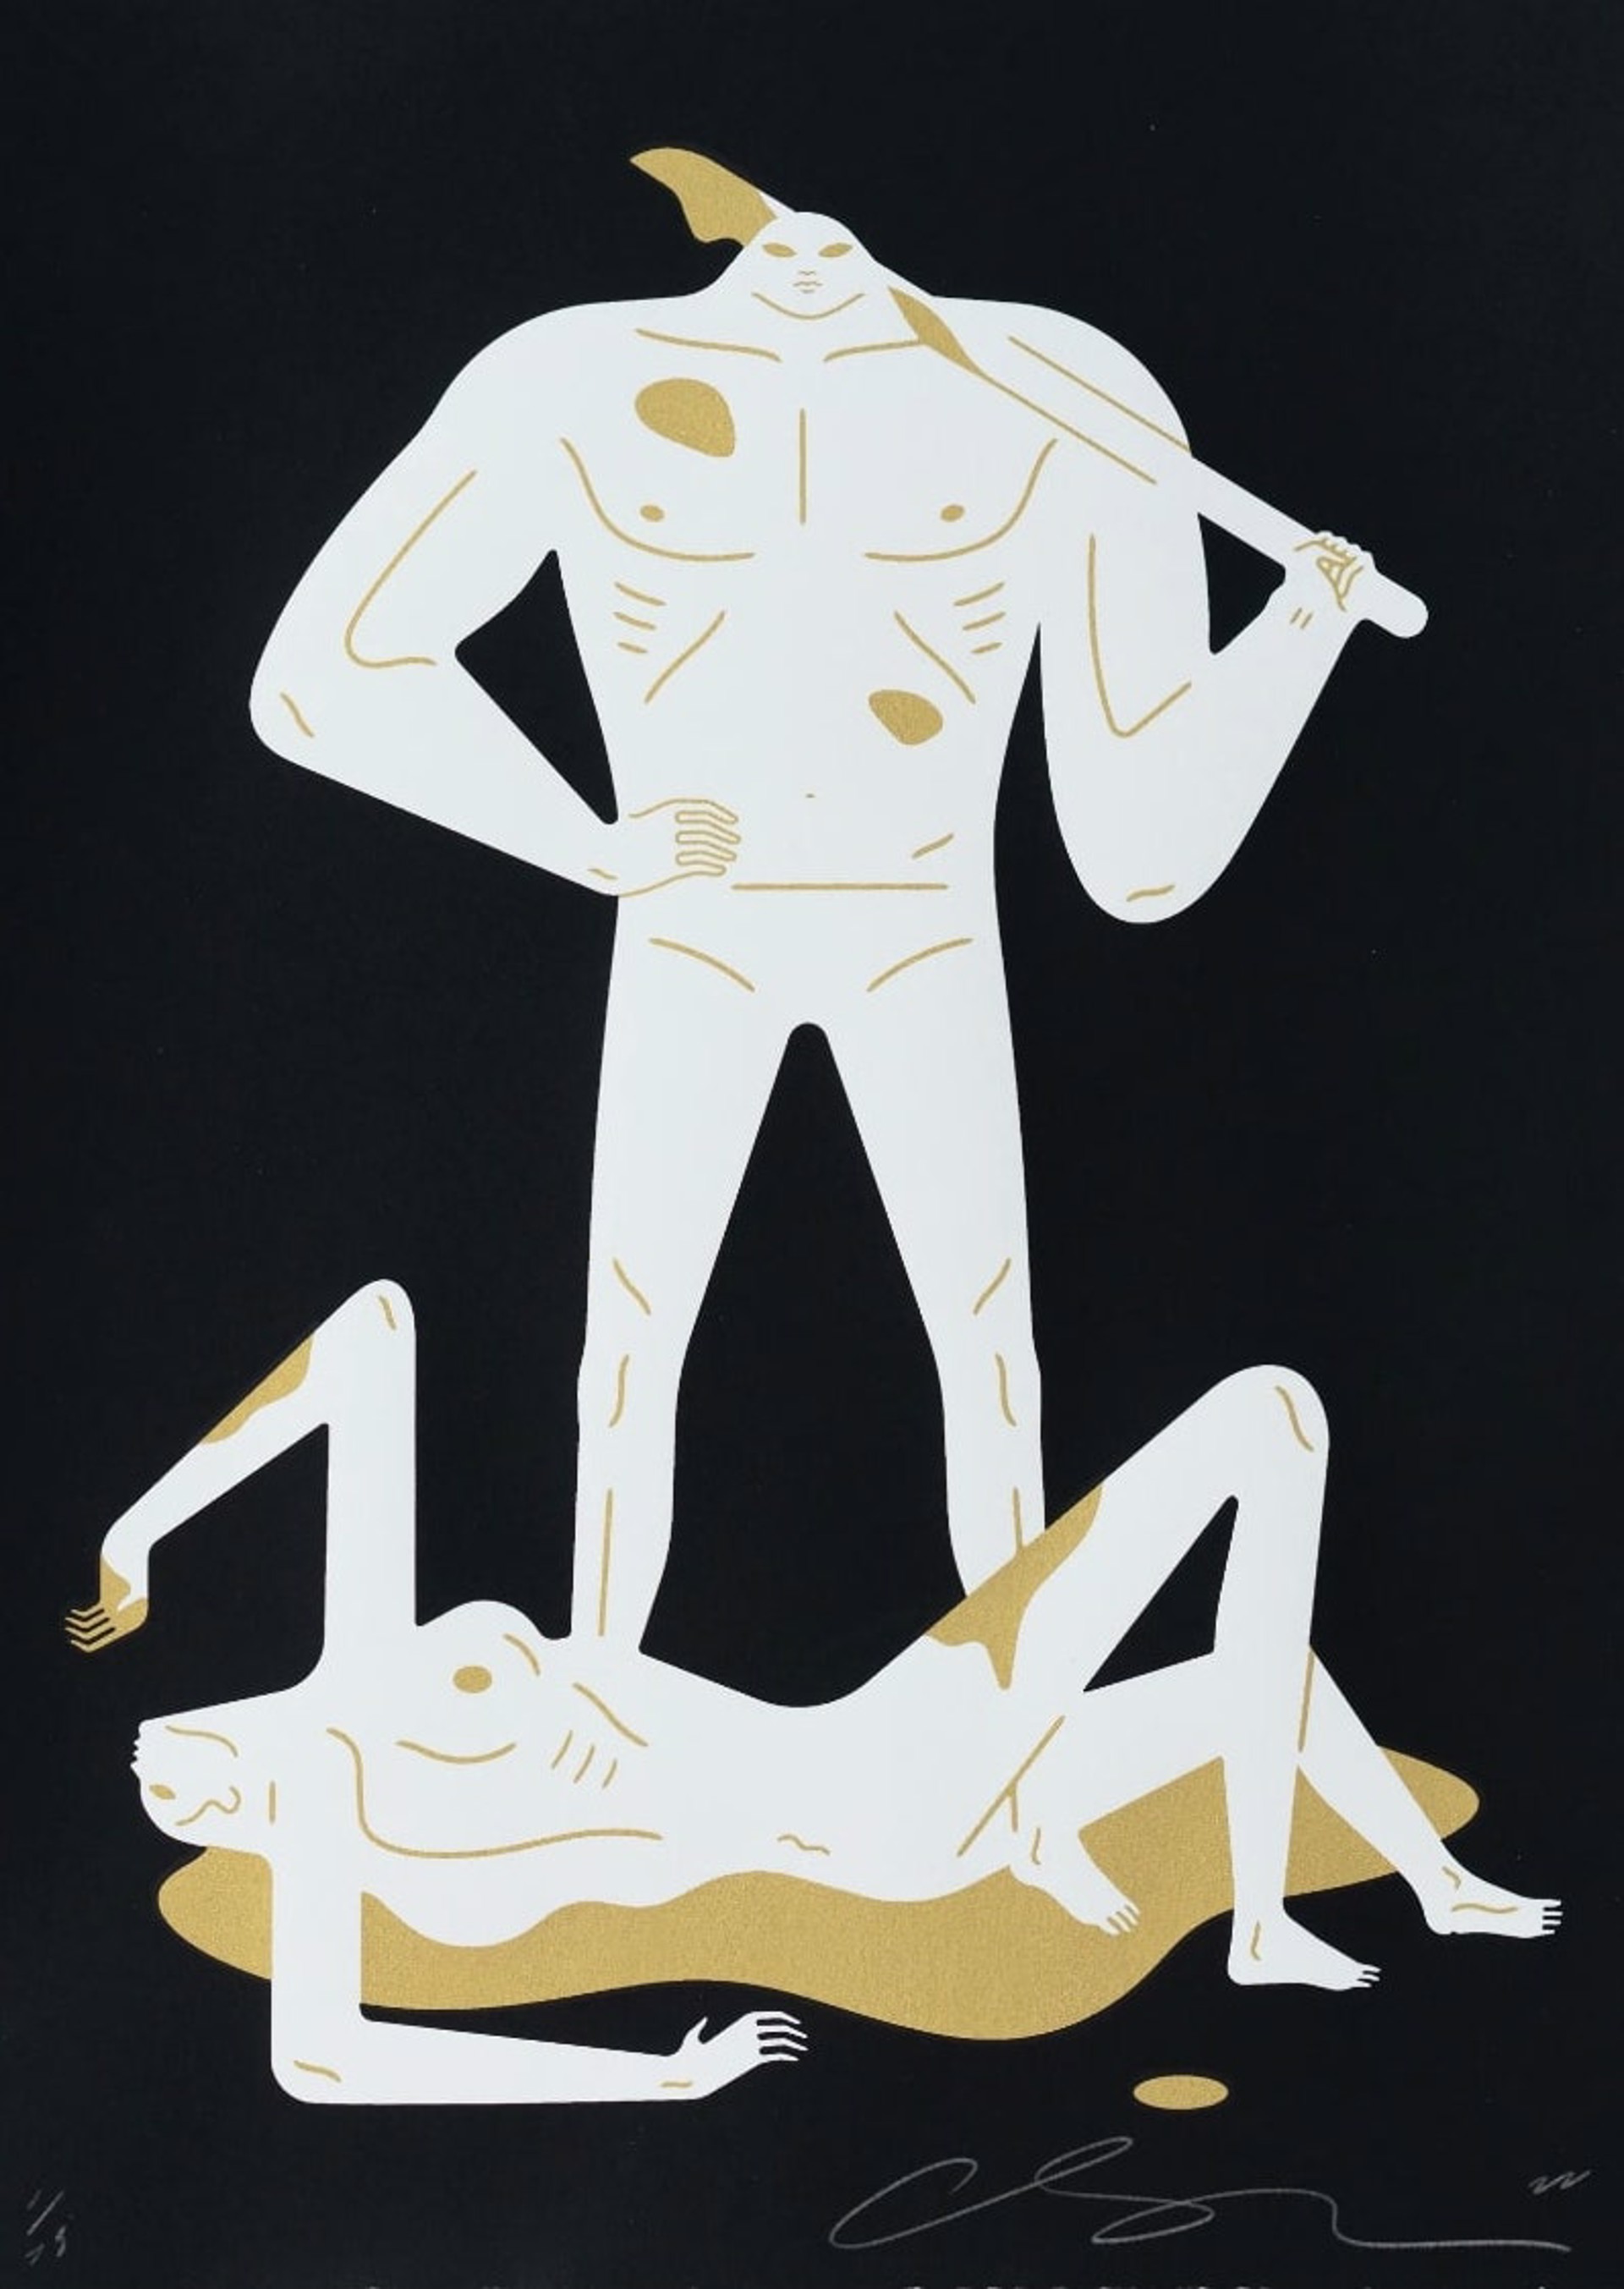 THE NAKED WOMAN & MAN (BLACK) by Cleon Peterson